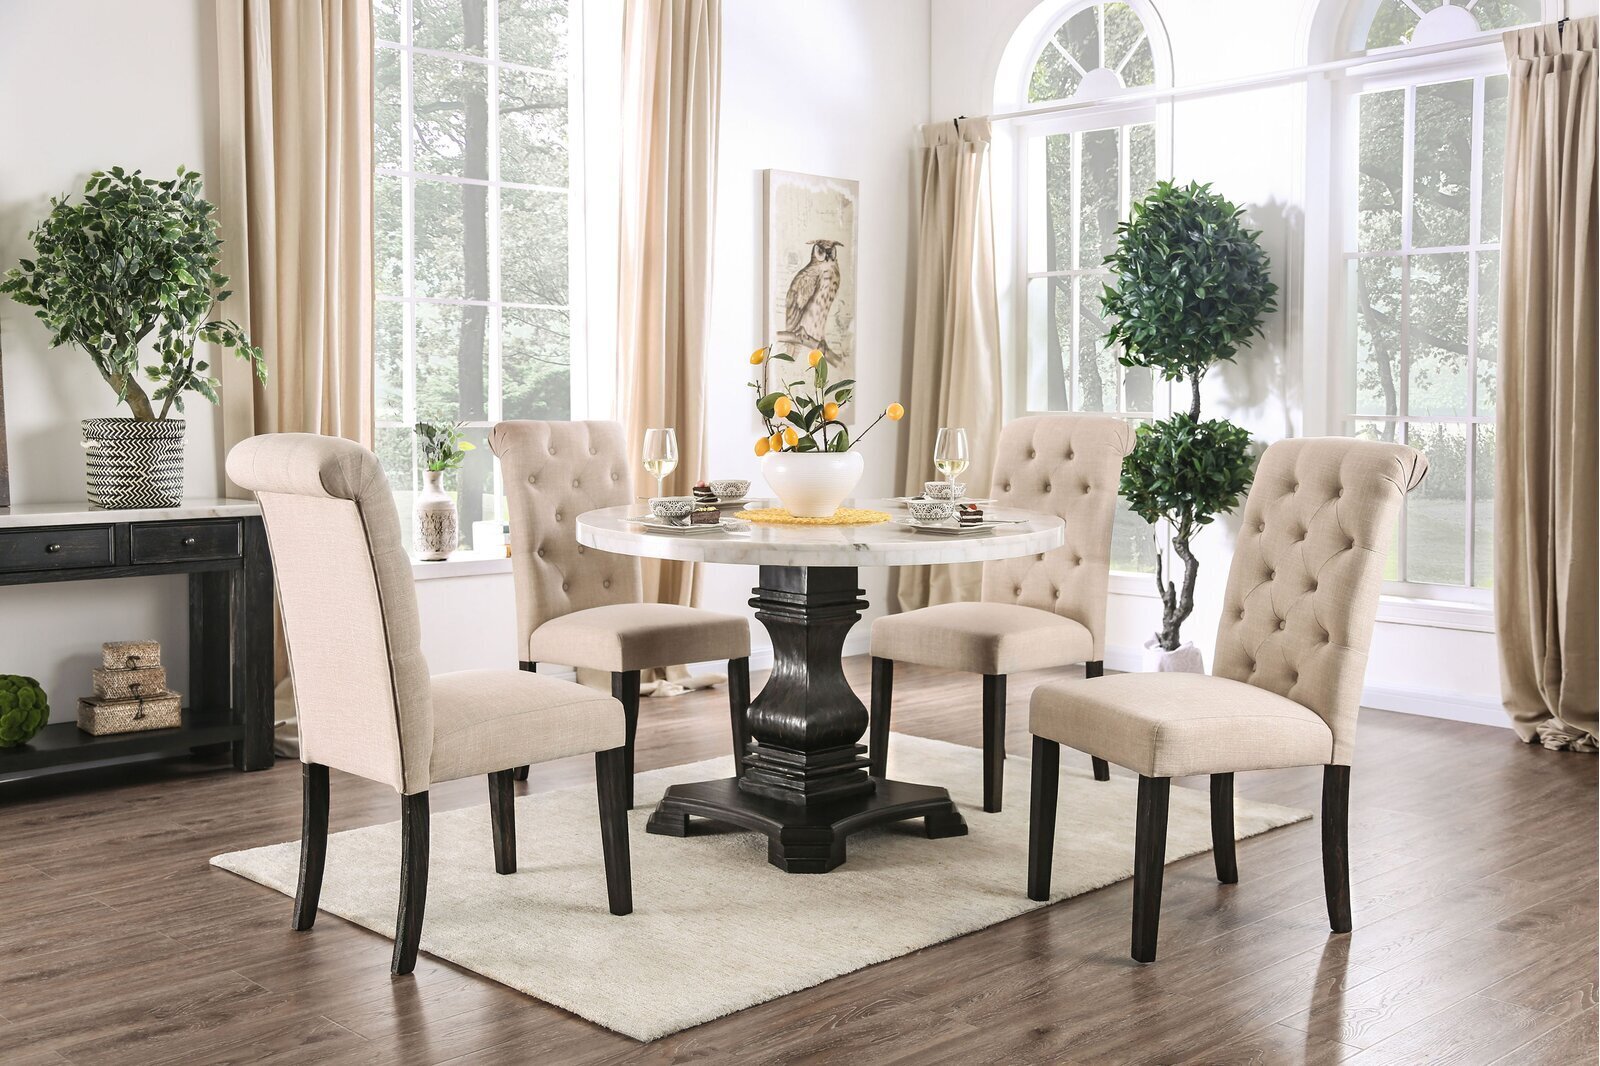 Traditional round marble dining table for 4